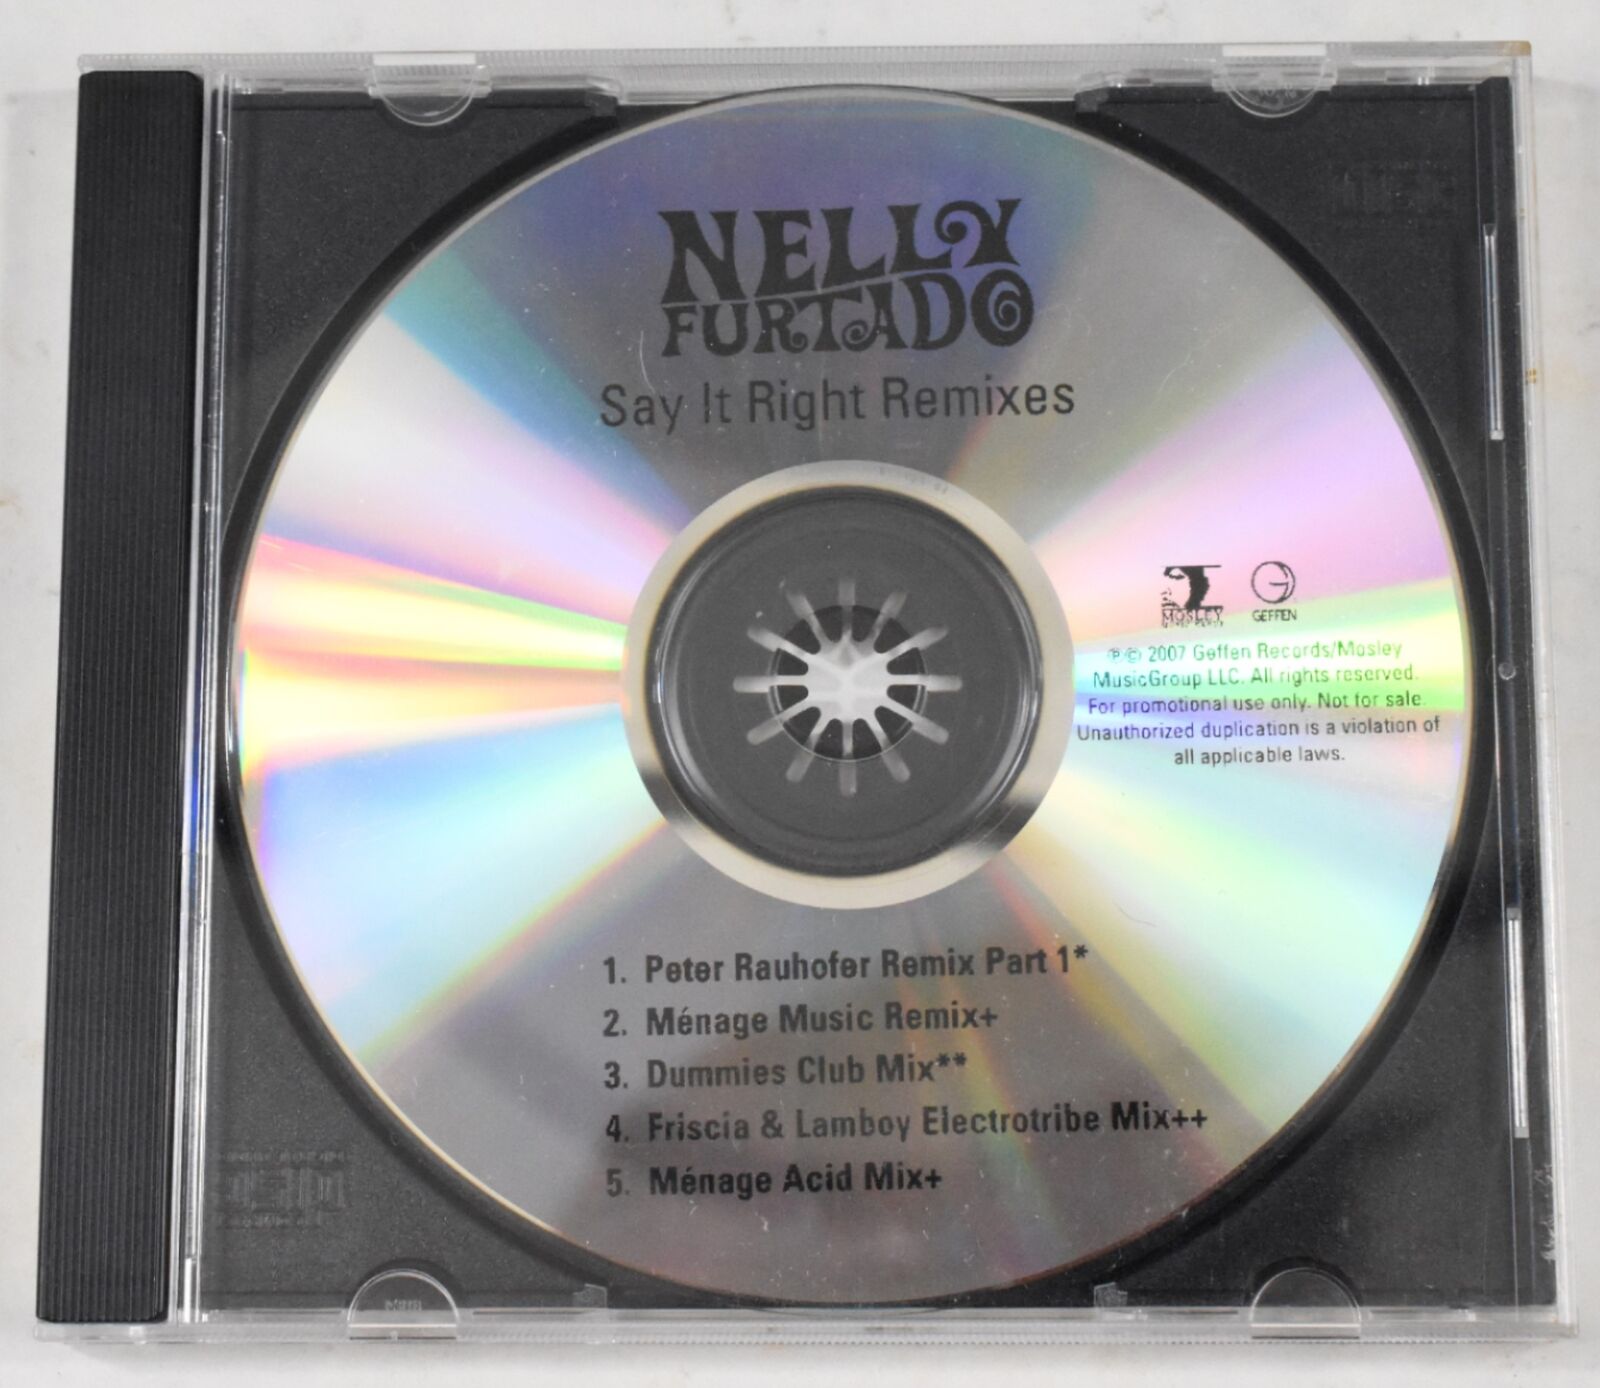 Say It Right Remixes by Nelly Furtado (CD, 2007, Geffen, Promotional Disc)